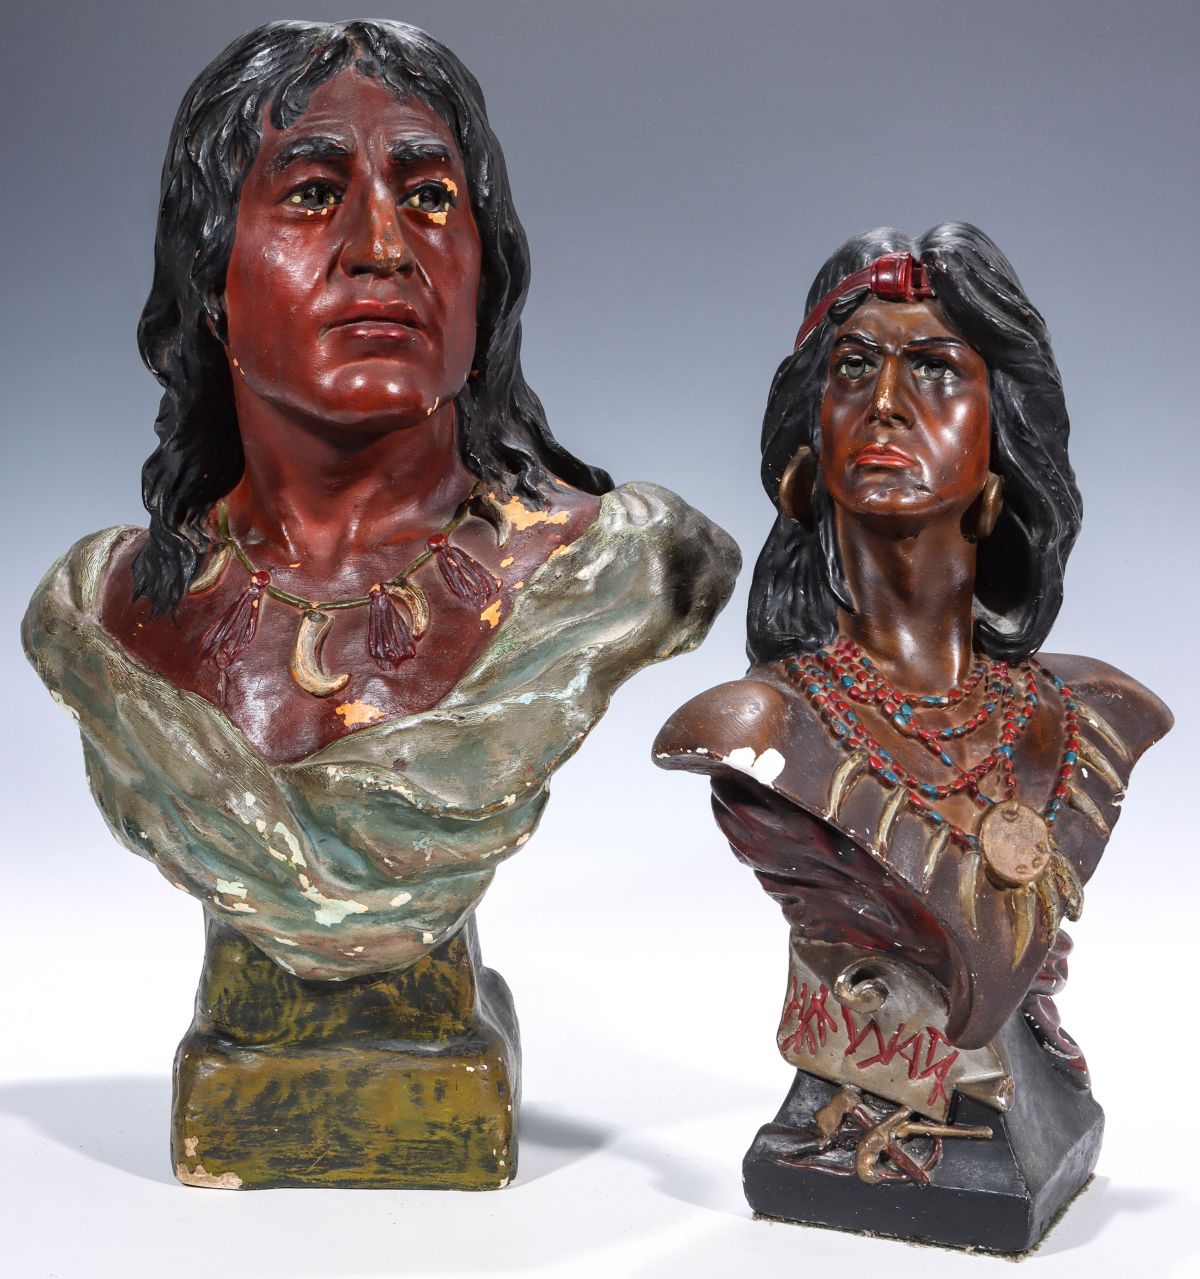 TWO EARLY 20C. POLYCHROME ENAMEL PLASTER INDIAN BUSTS